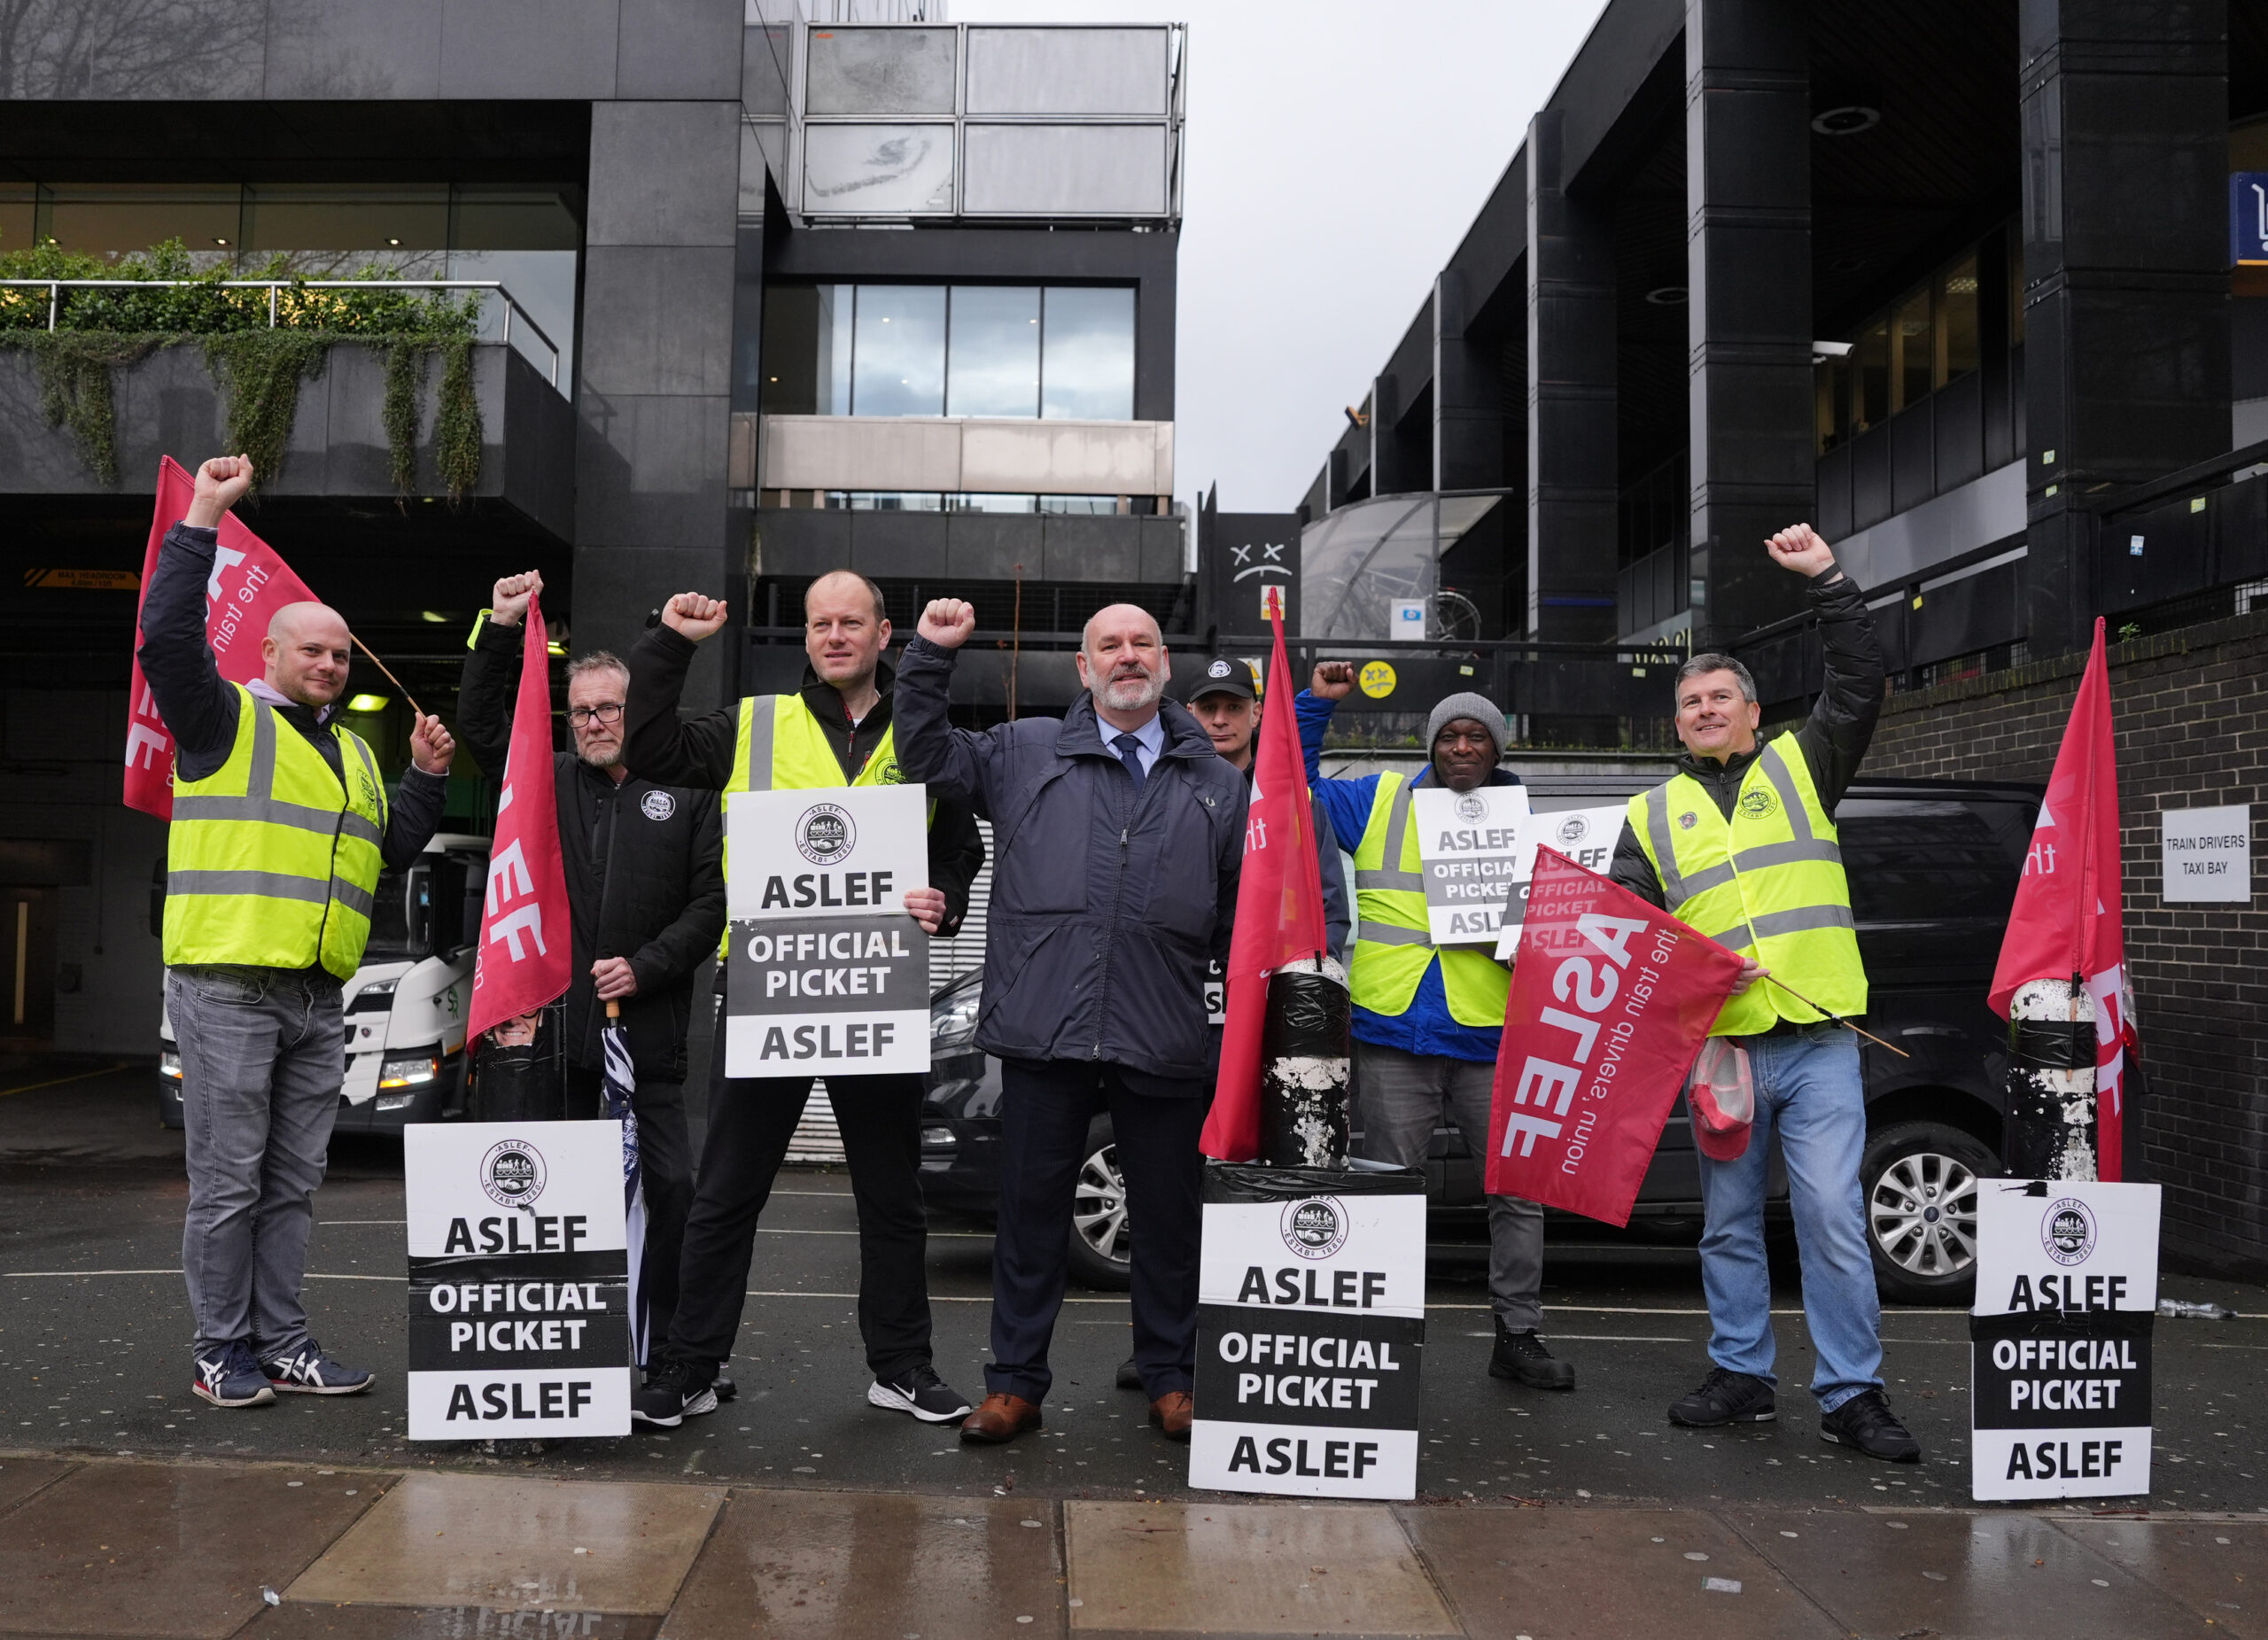 Aslef members on the picket line at Waterloo train station in London, as the train drivers union are launching a wave of fresh walkouts in a long-running dispute over pay